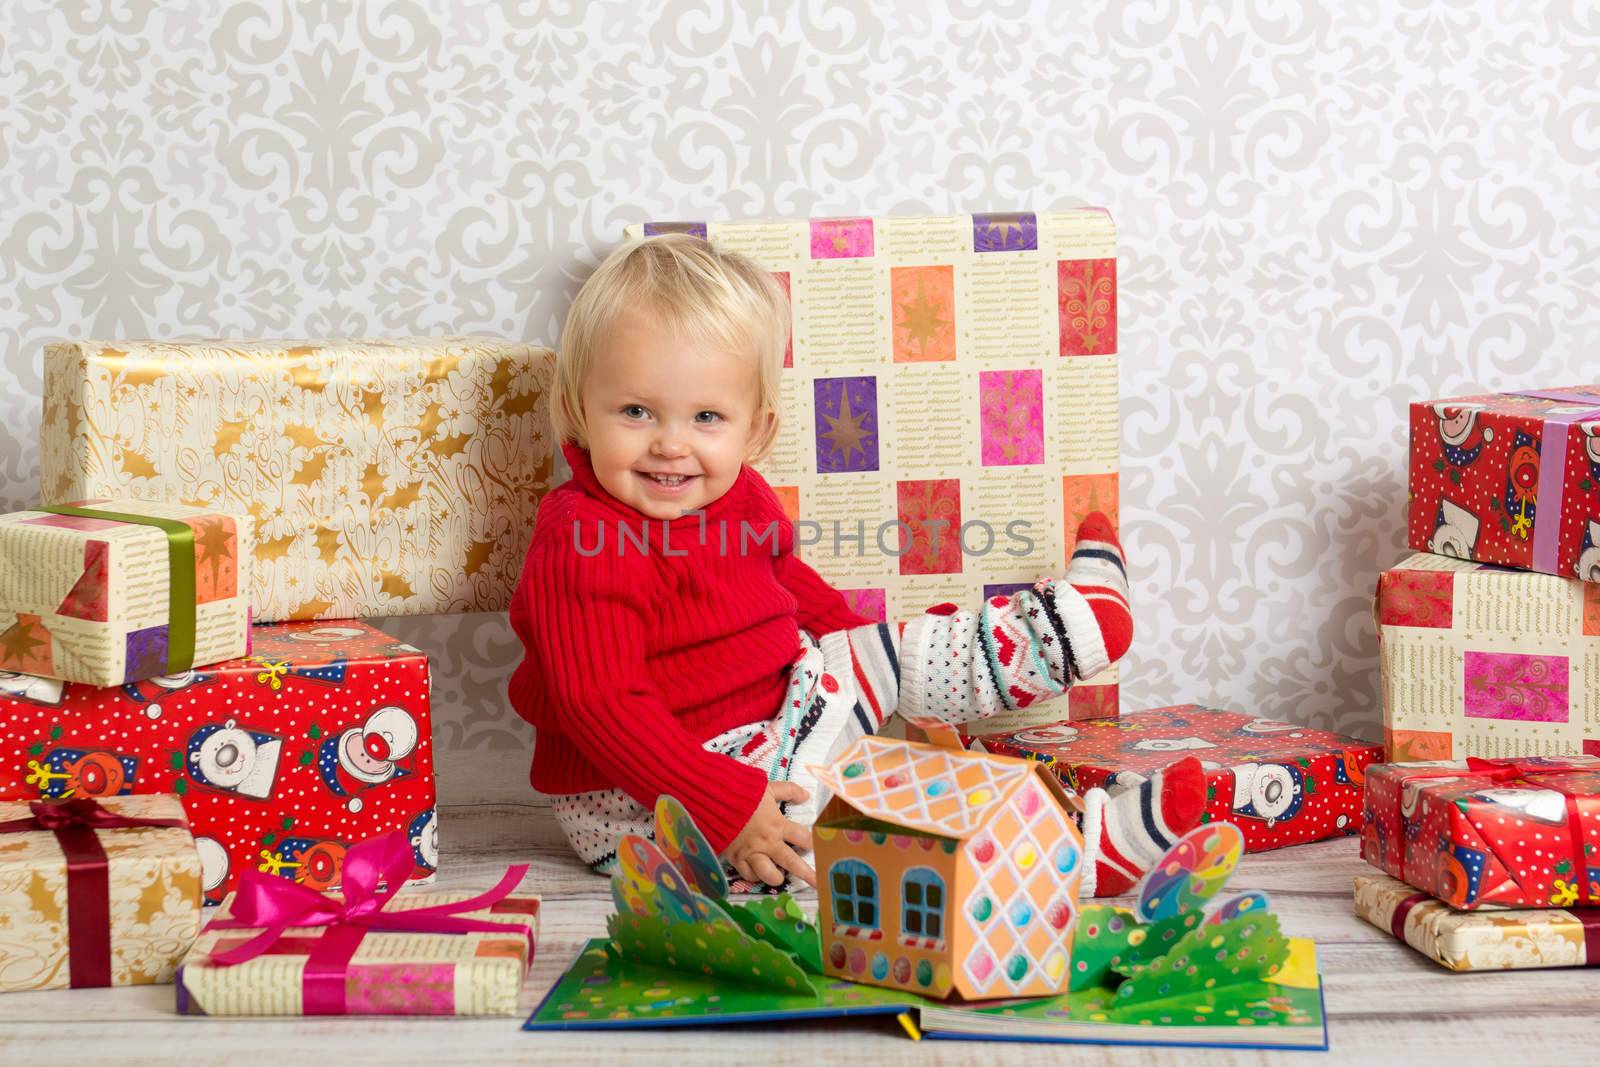 Dressed festively girl with stacks of present boxes around sitting on the floor and smiling.